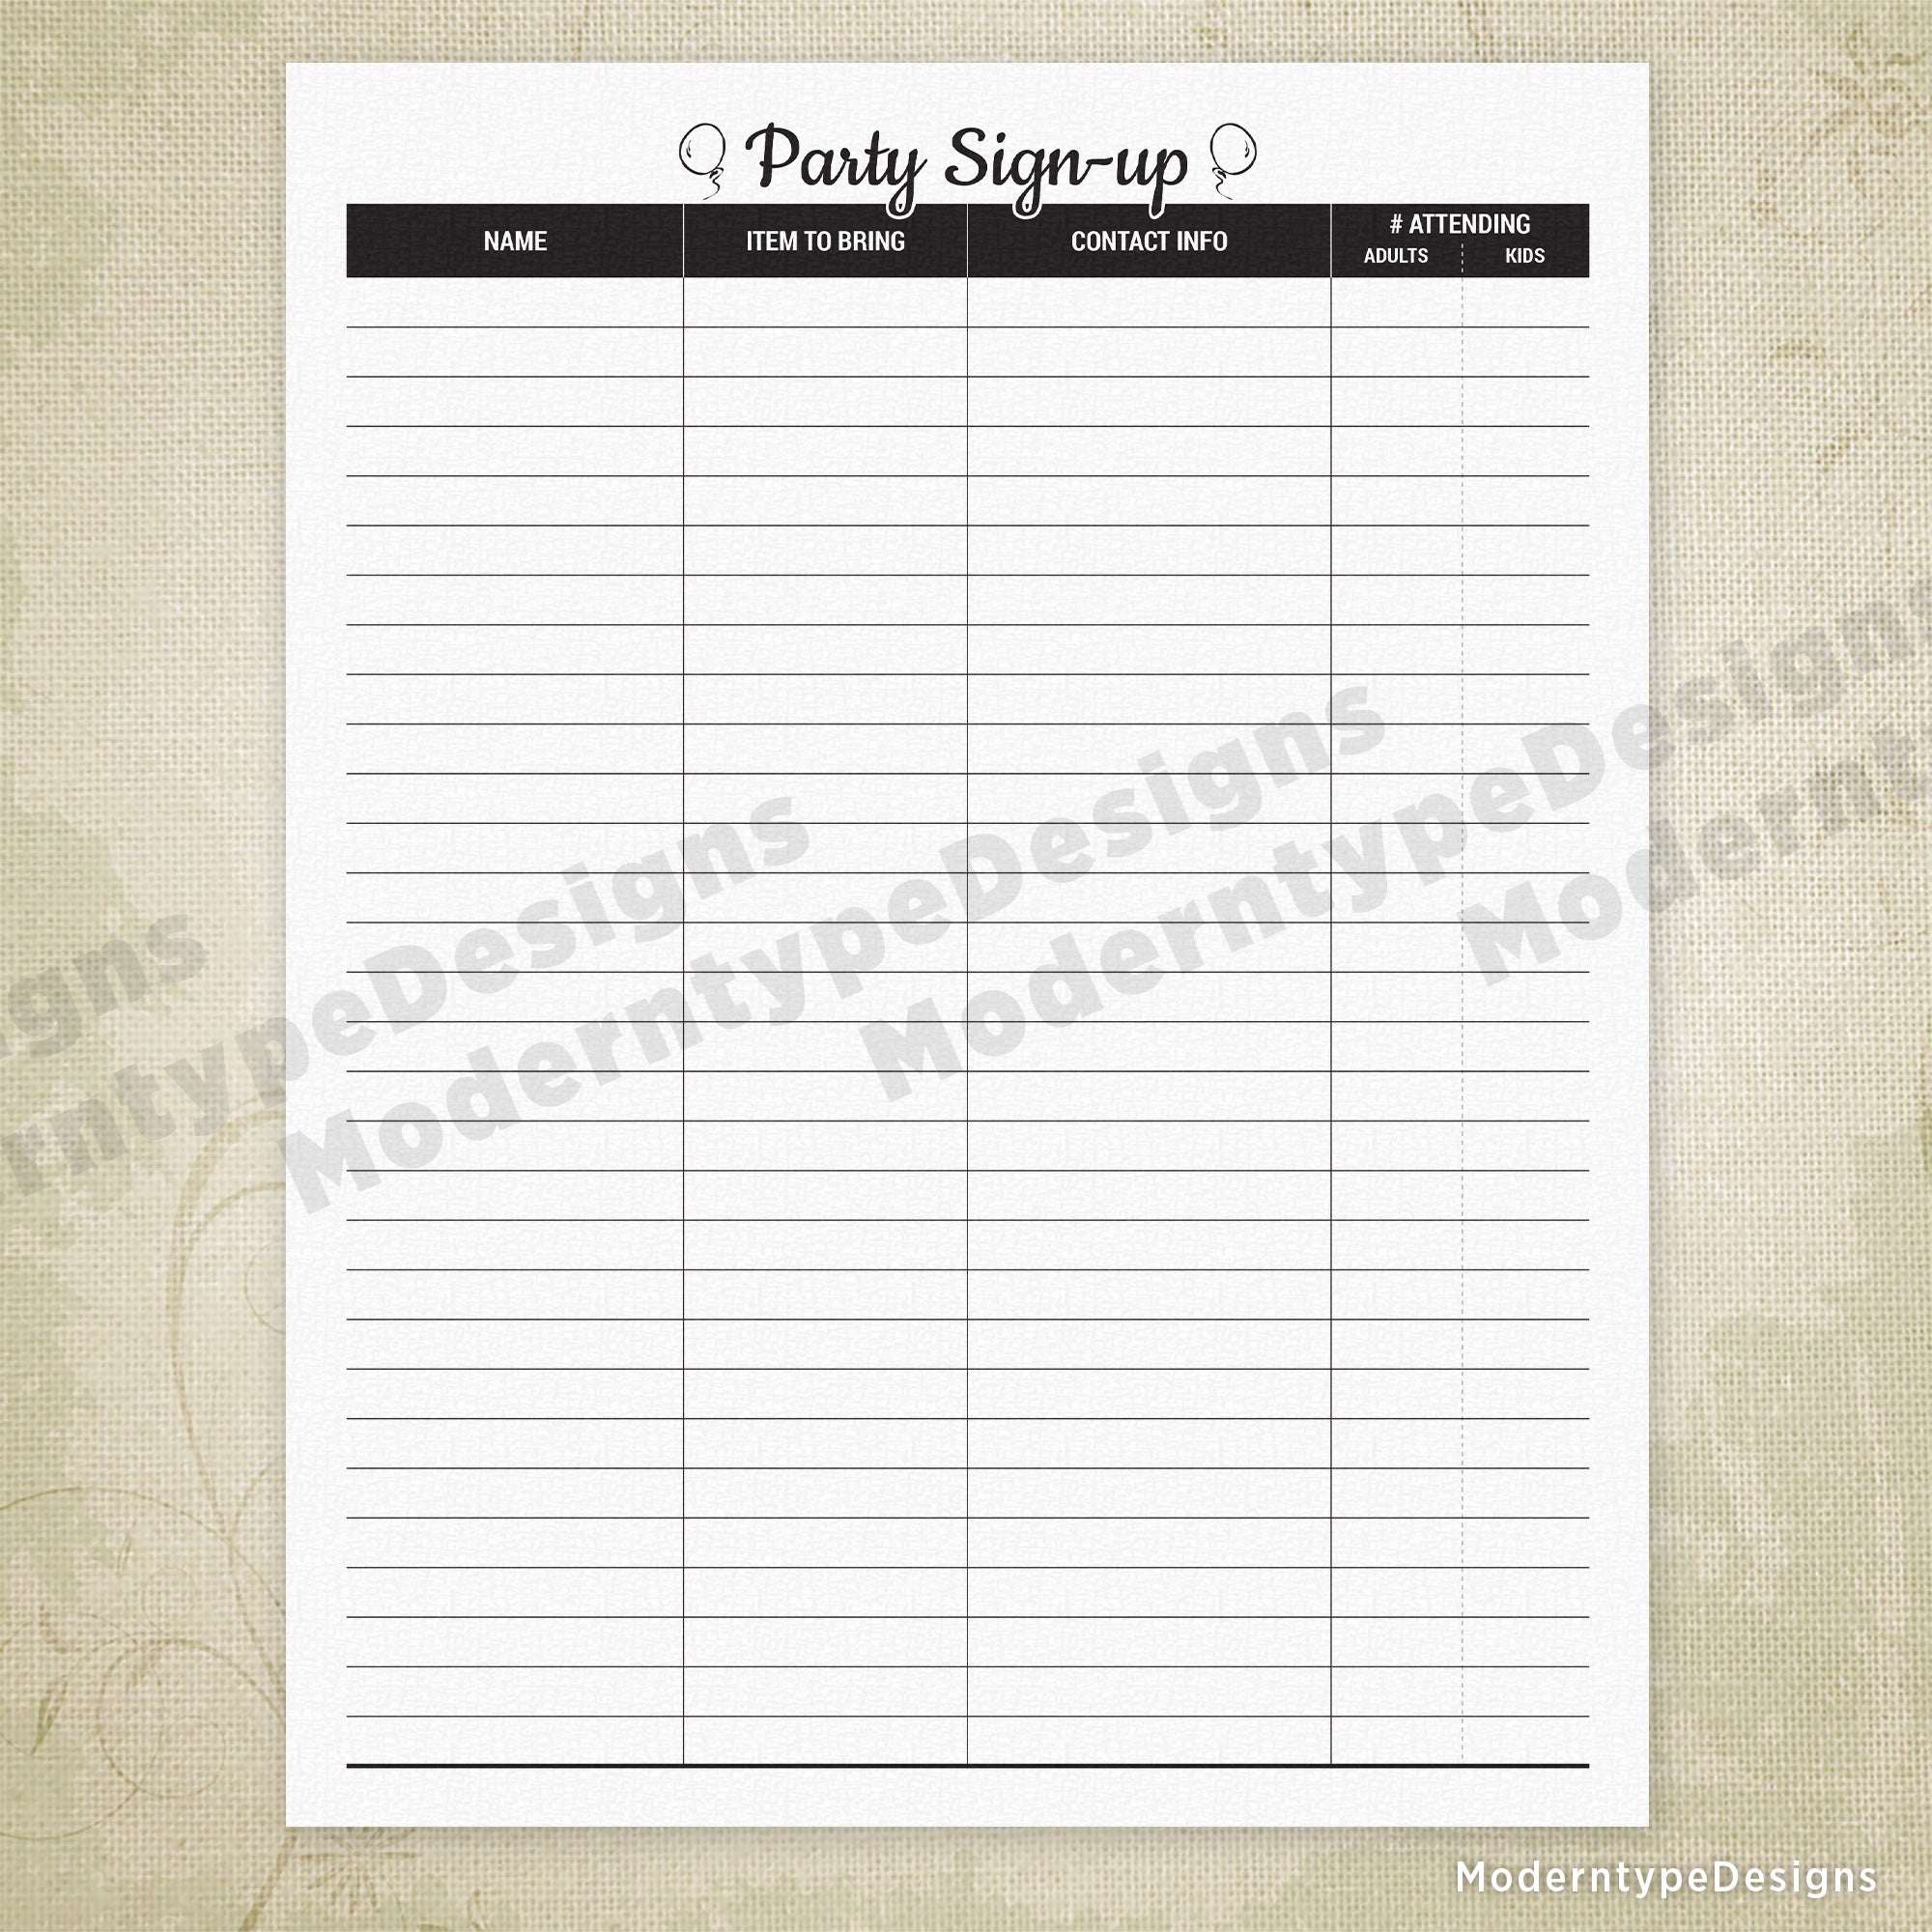 Party Sign-up Printable Form